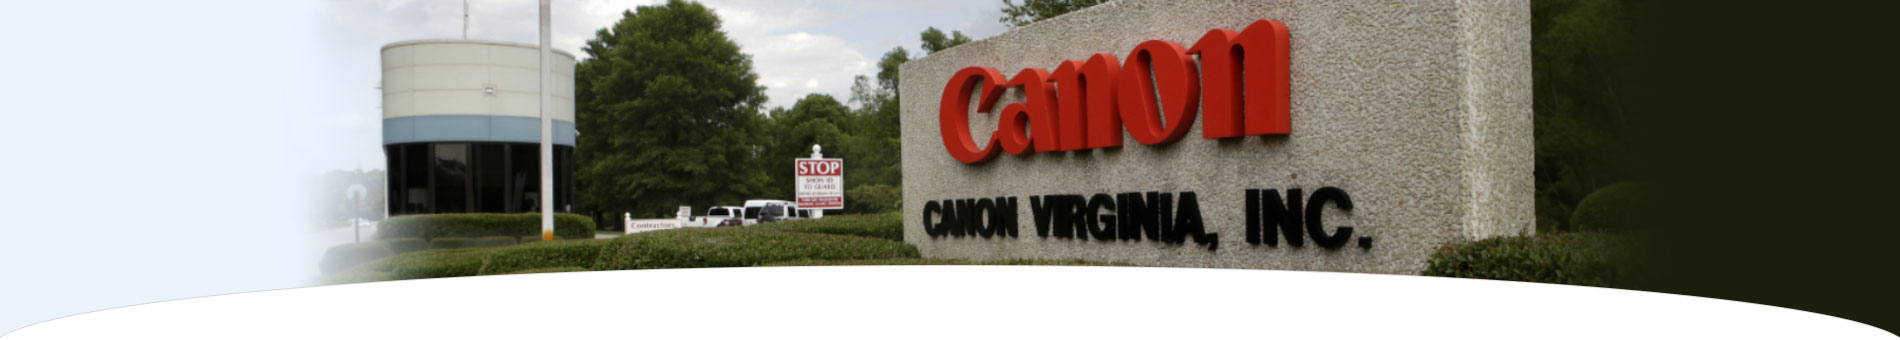 About Us - Canon Virginia, Inc.